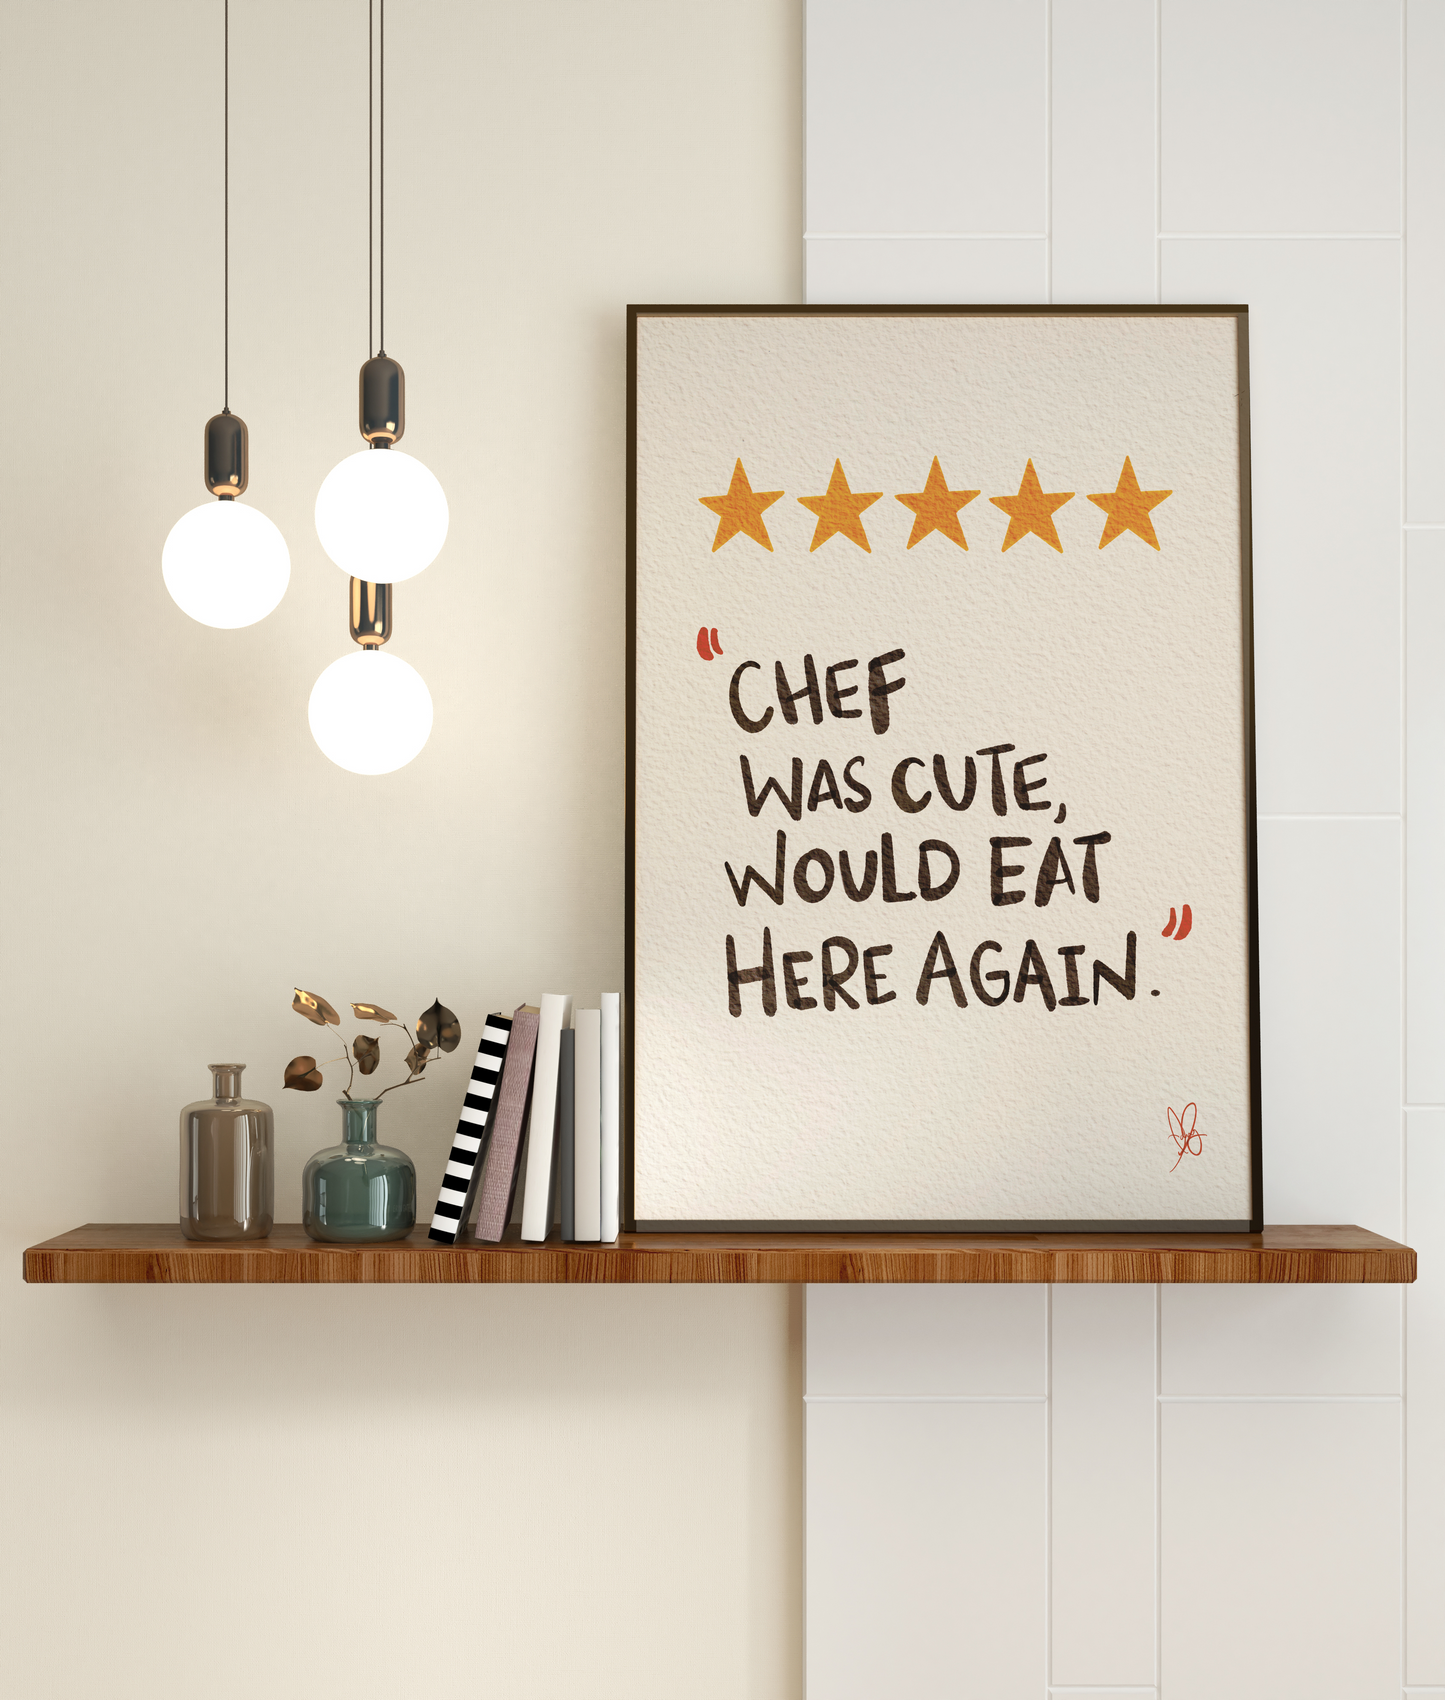 Discover the Playful Watercolor Chef Was Cute, Would Eat Here Again - Hand-Drawn 5-Star Rated Poster! Shop Now for Quotes, Digital Prints, Wall Decor, Wall Art, and Posters, brimming with vivacious charm